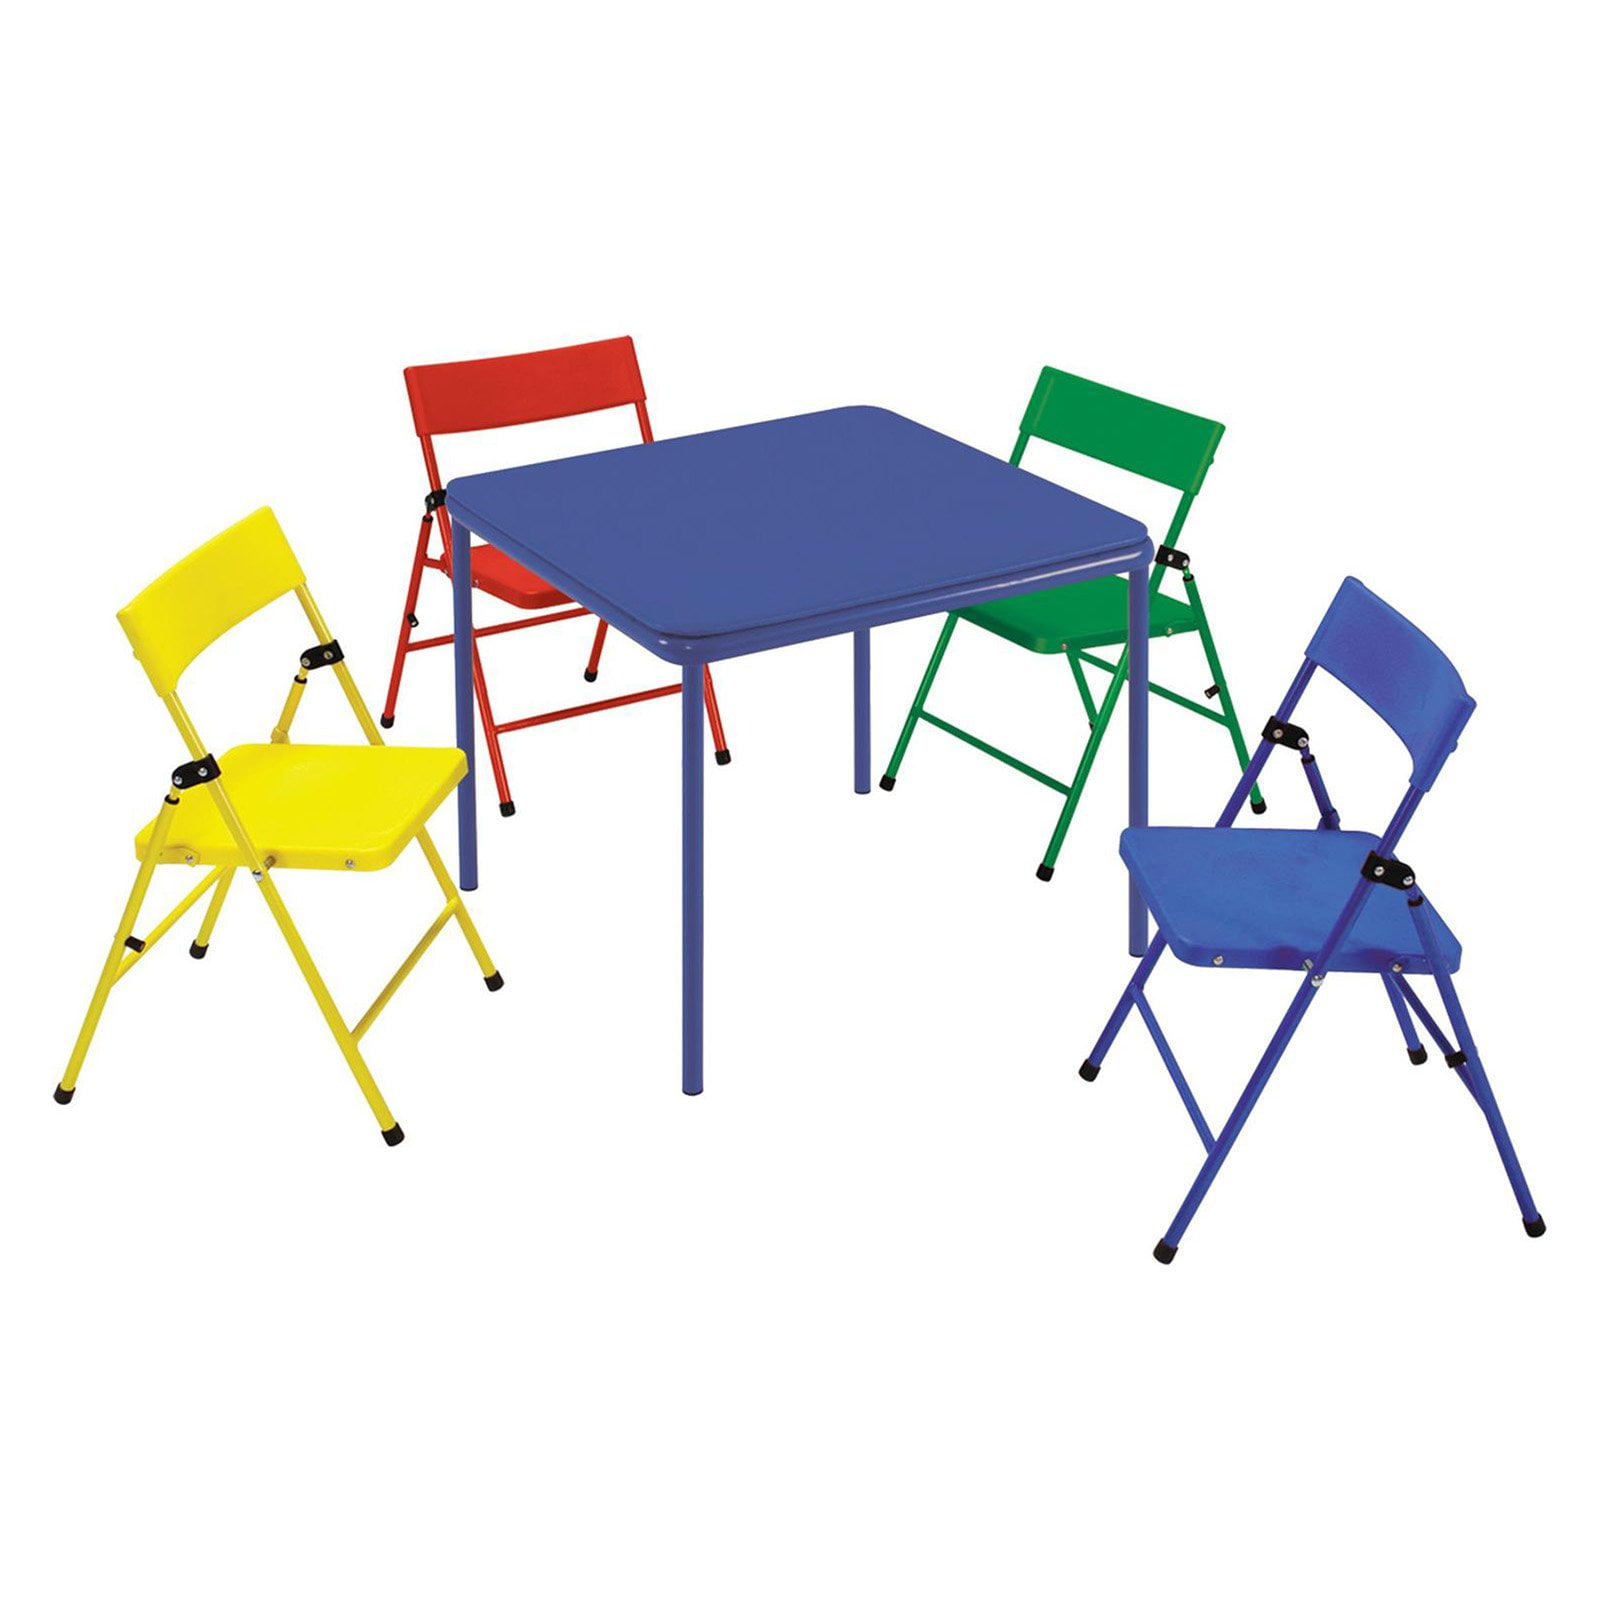 Home Garden Patio Garden Furniture Sets Kids Colorful 5 Pc Folding Table And Chair Set Daycare Classroom